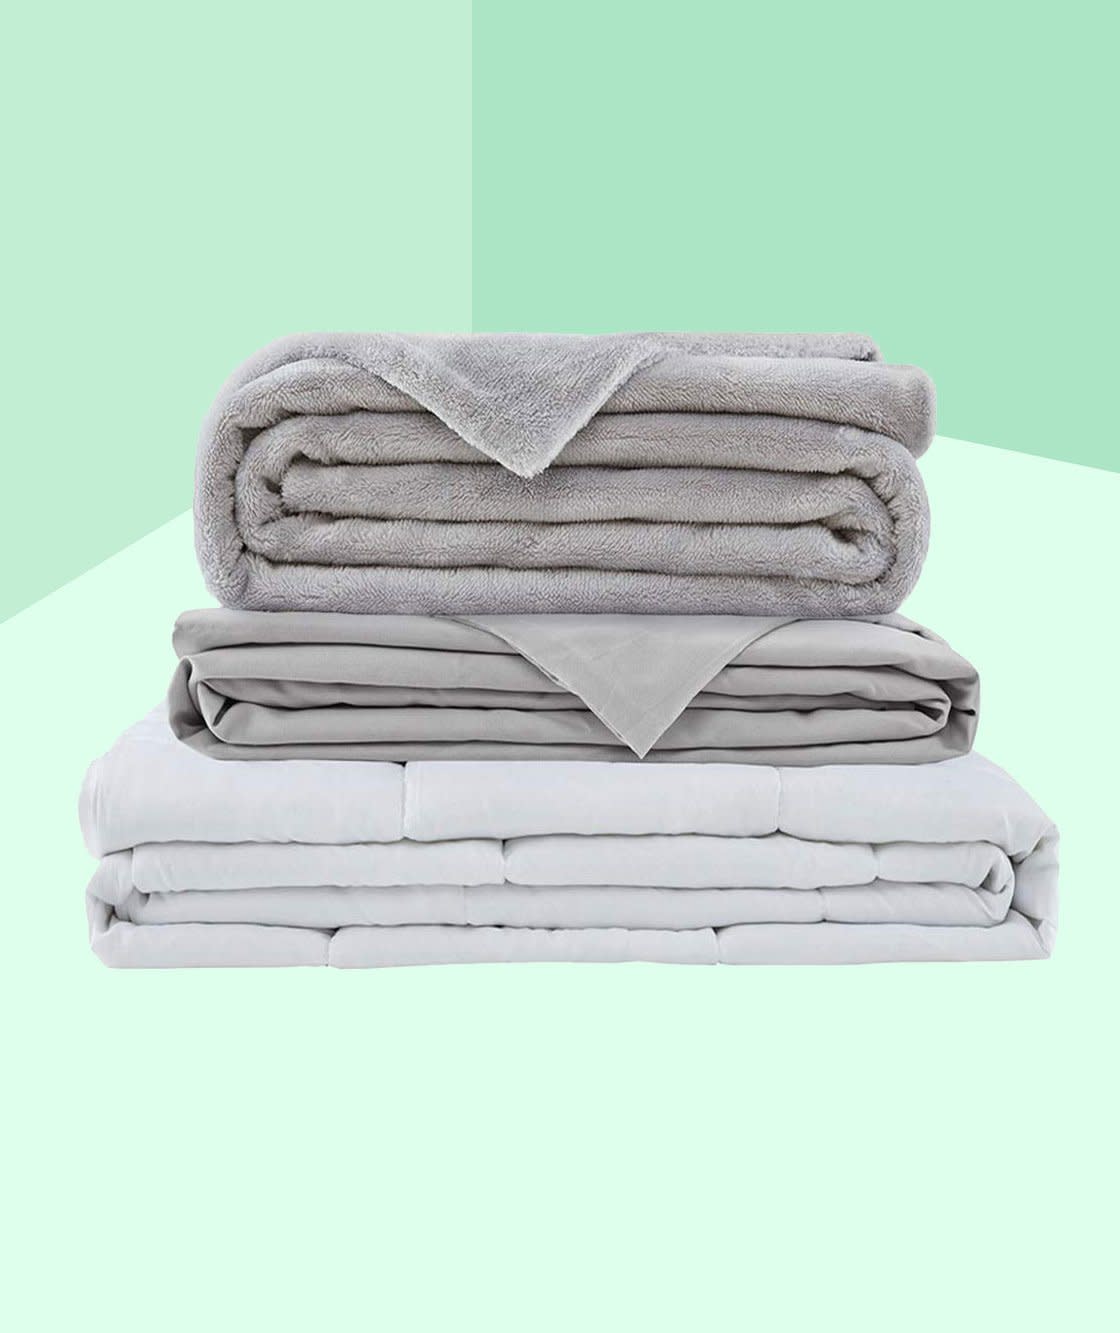 You Can Get an Amazing Deal on This Top-Rated Weighted Blanket—For Only